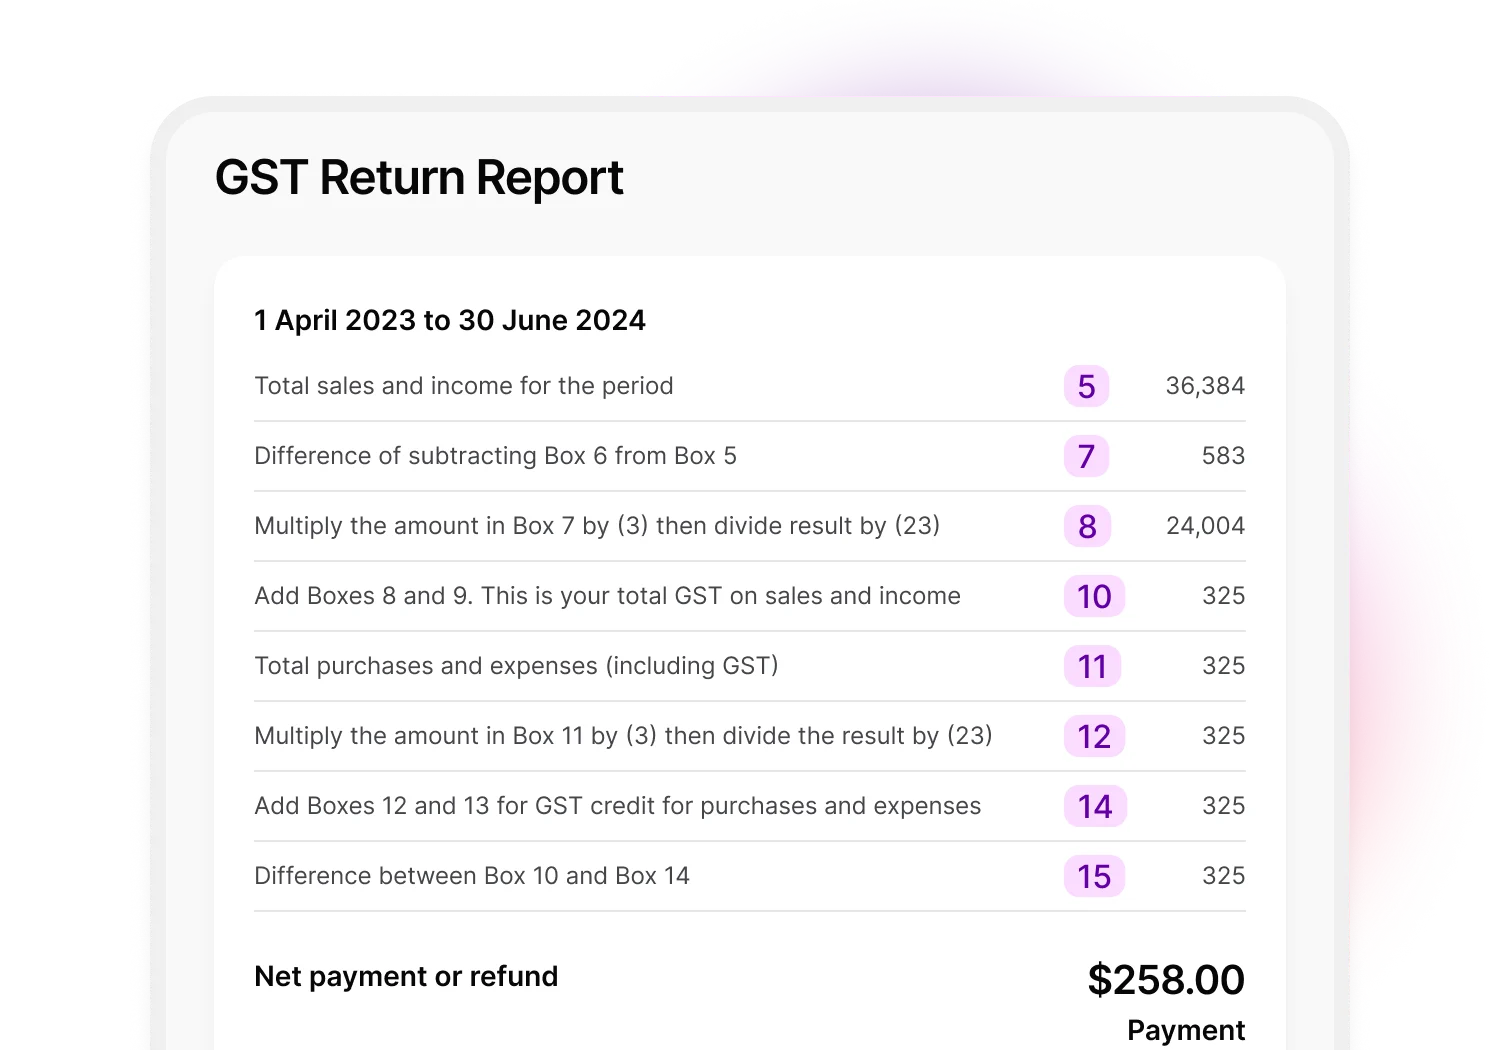 A GST return report created in MYOB Business. The date range is at the top, followed by detailed line items and finally, the net payment or refund.